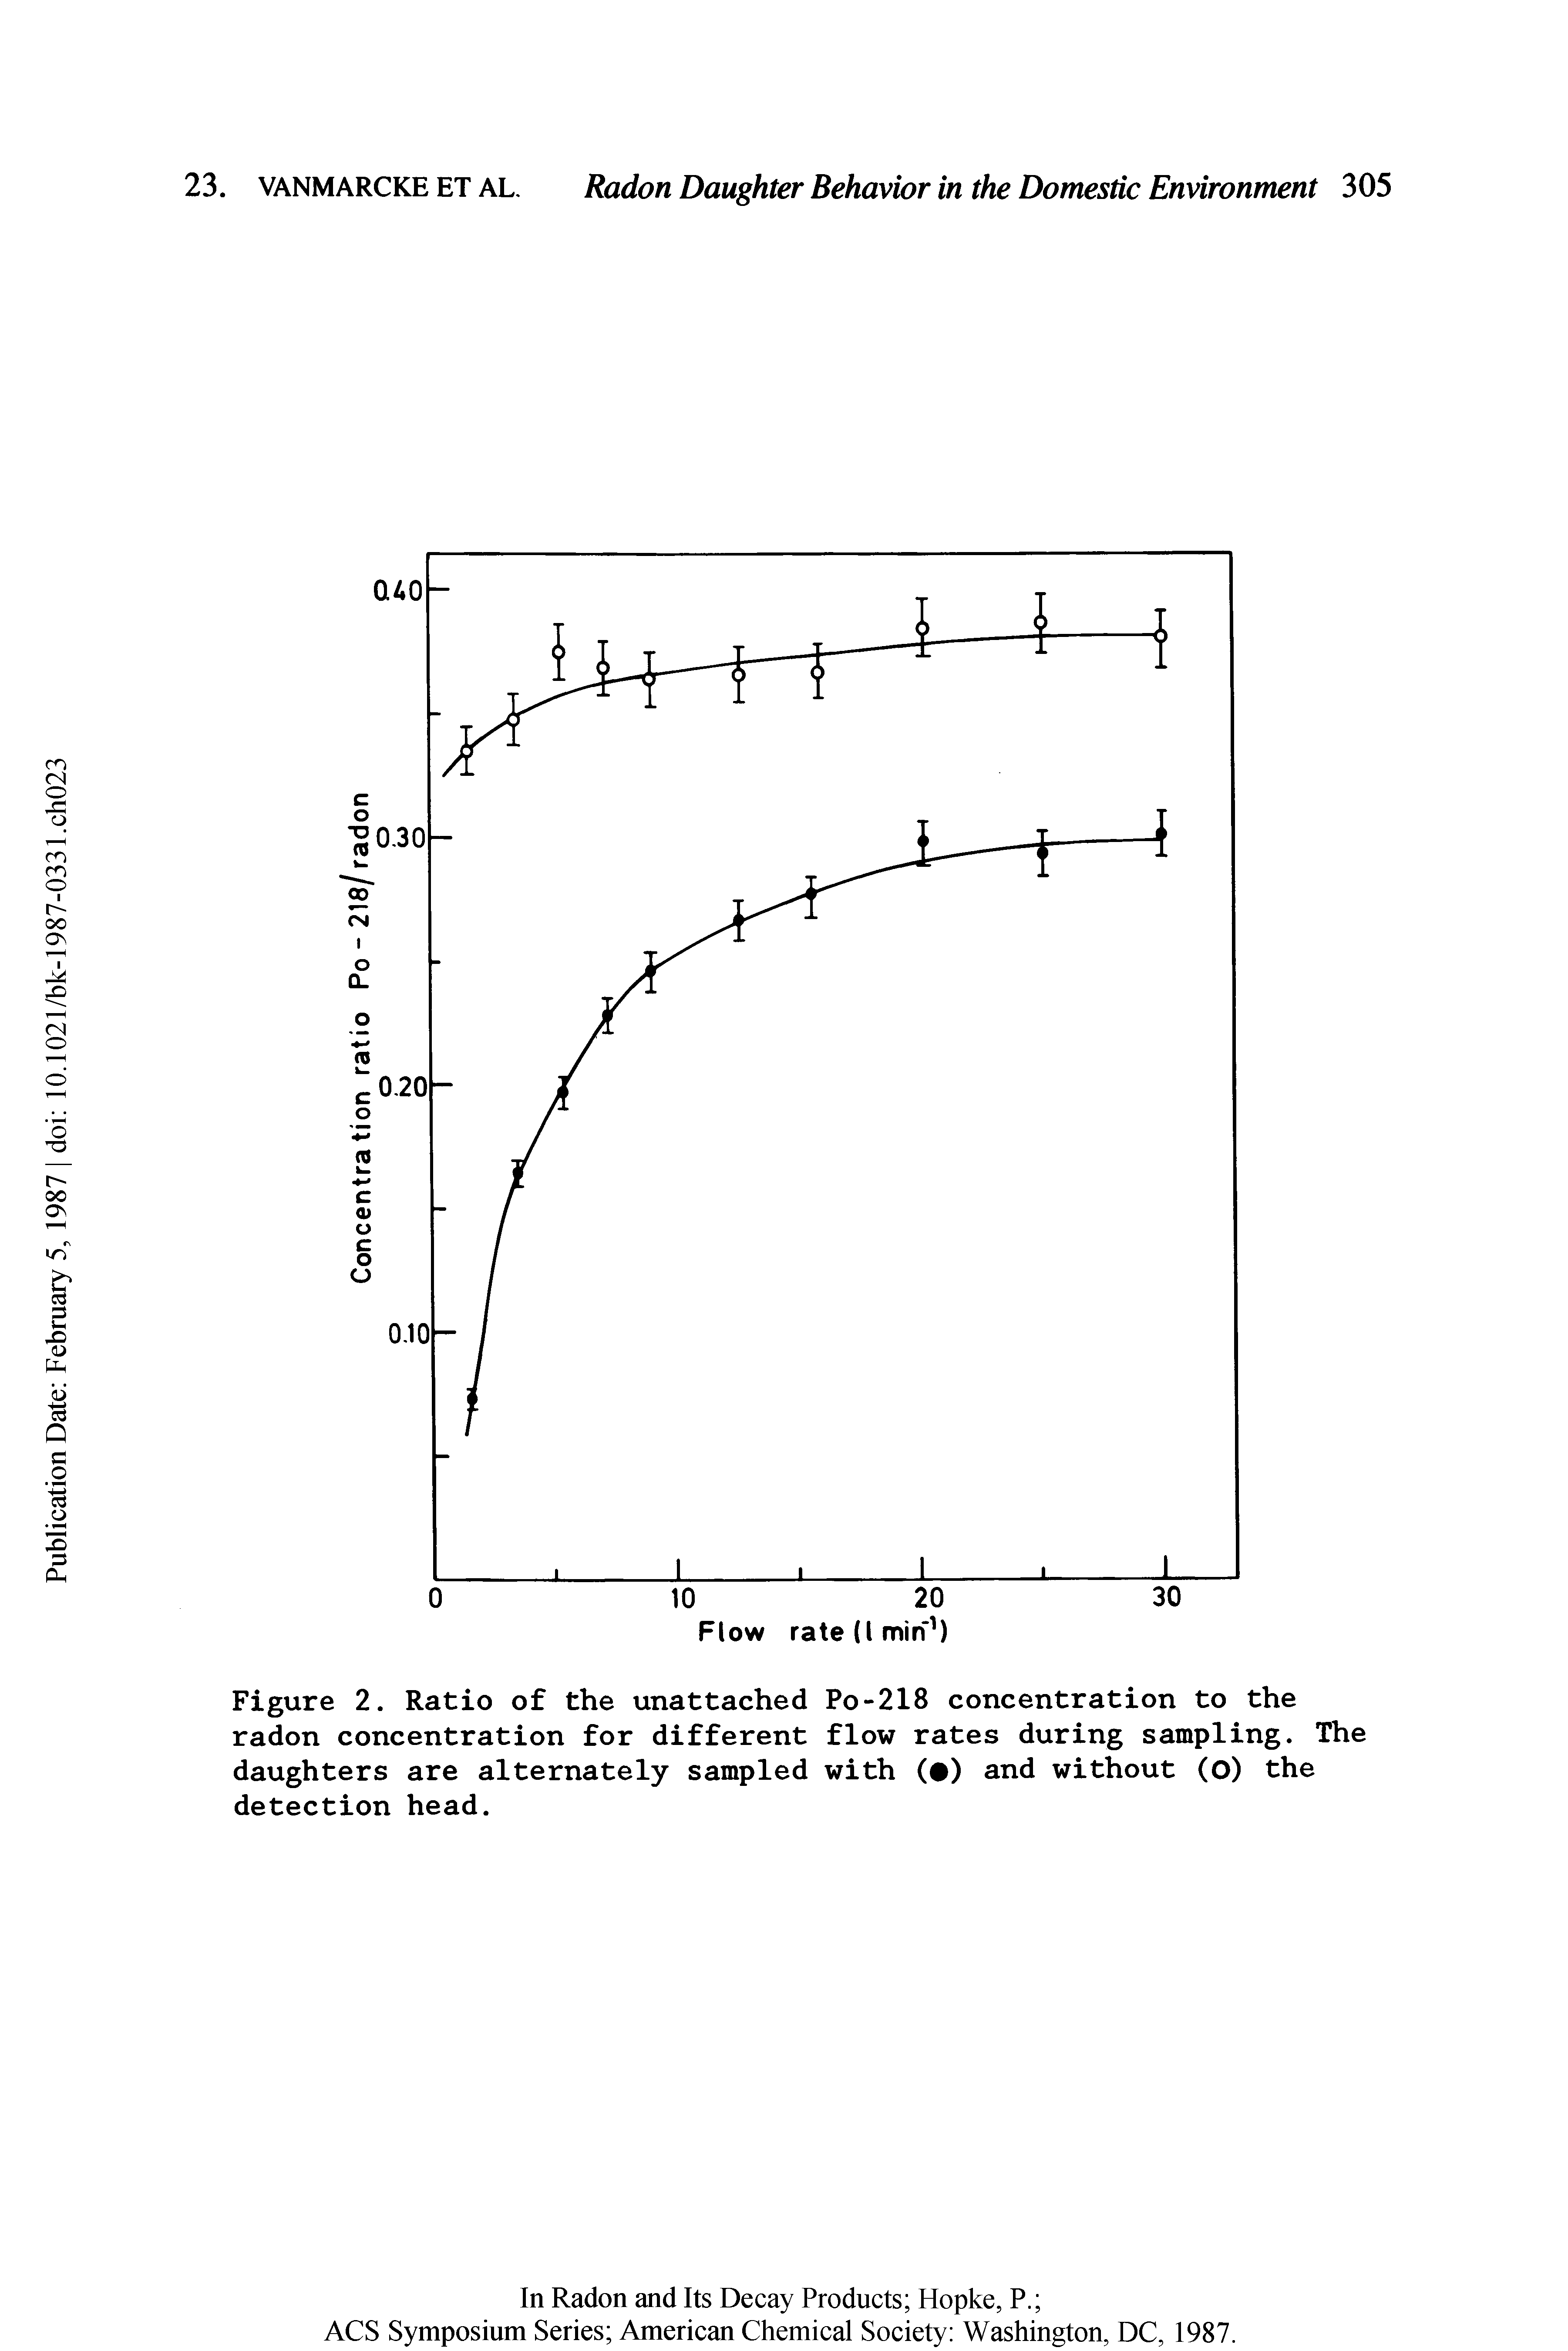 Figure 2. Ratio of the unattached Po-218 concentration to the radon concentration for different flow rates during sampling. The daughters are alternately sampled with ( ) and without (O) the detection head.